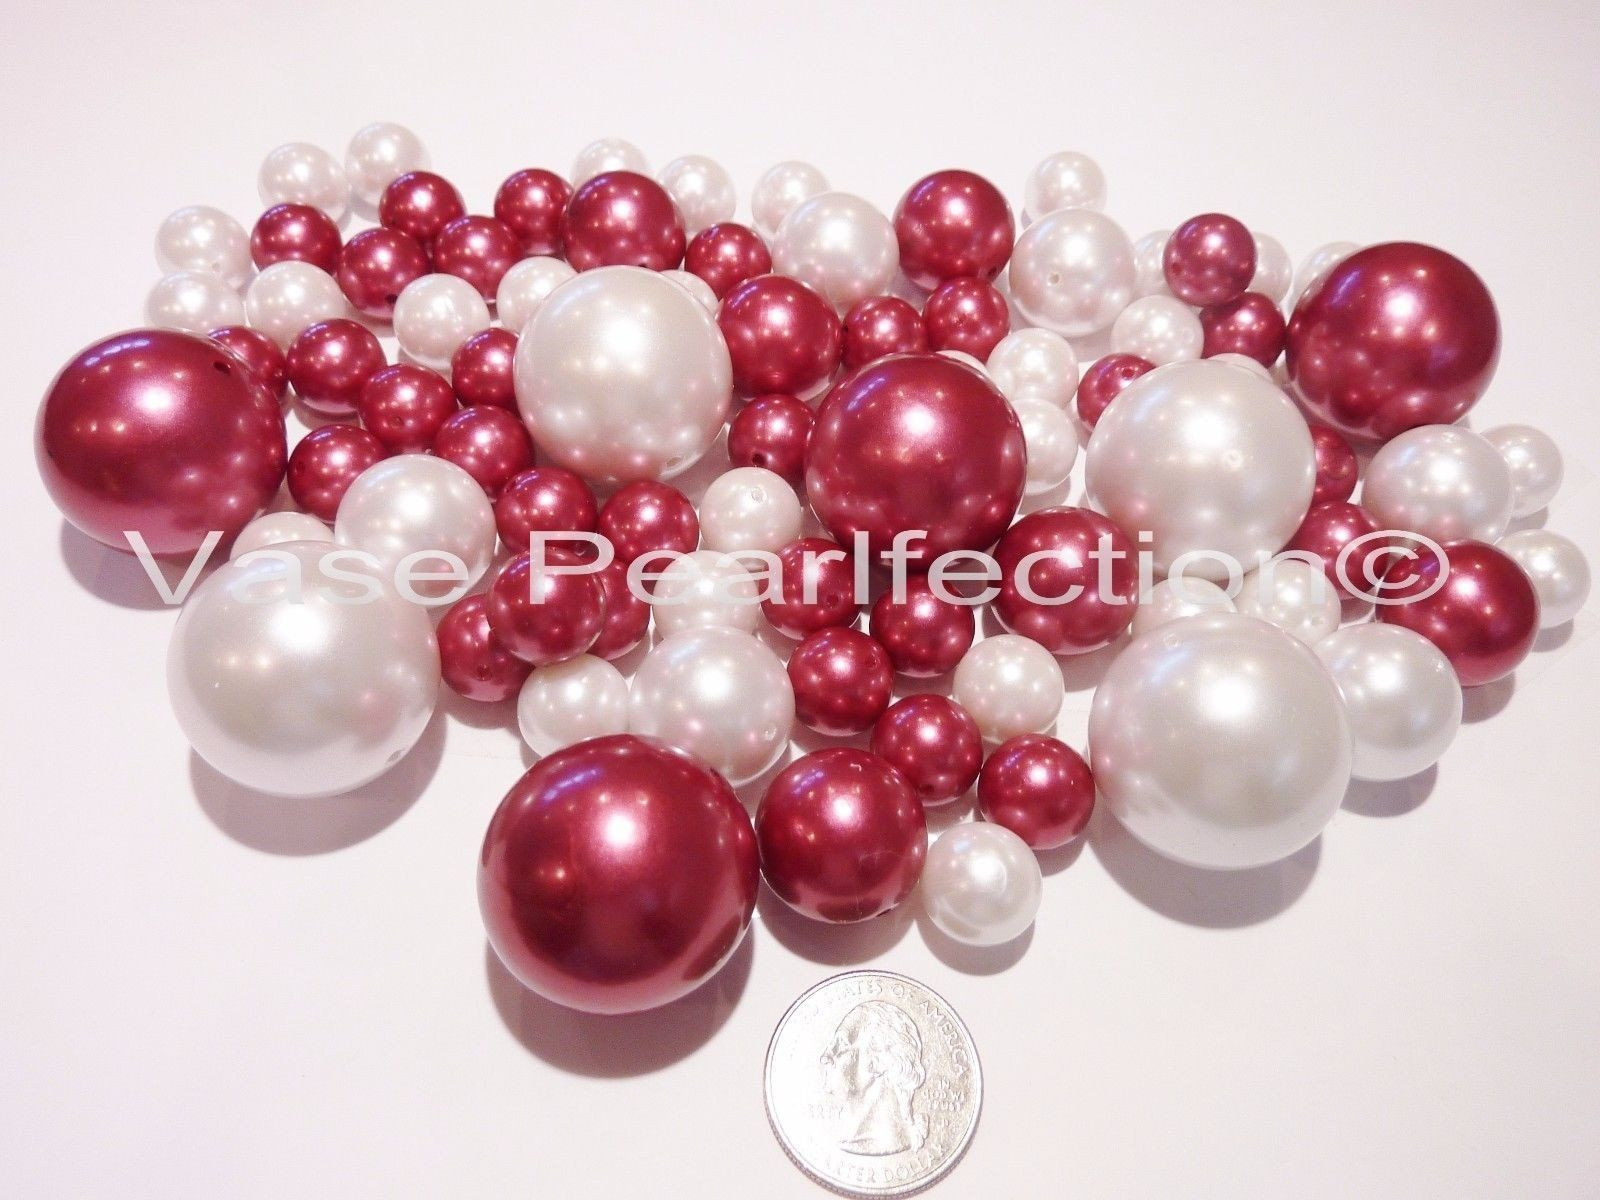 25 Unique Pink Vase Filler 2024 free download pink vase filler of 265 pcs red silver ivory pearls wedding combo mix 14mm with regard to red white pearls jumbo assorted sizes vase fillers for decorating centerpieces